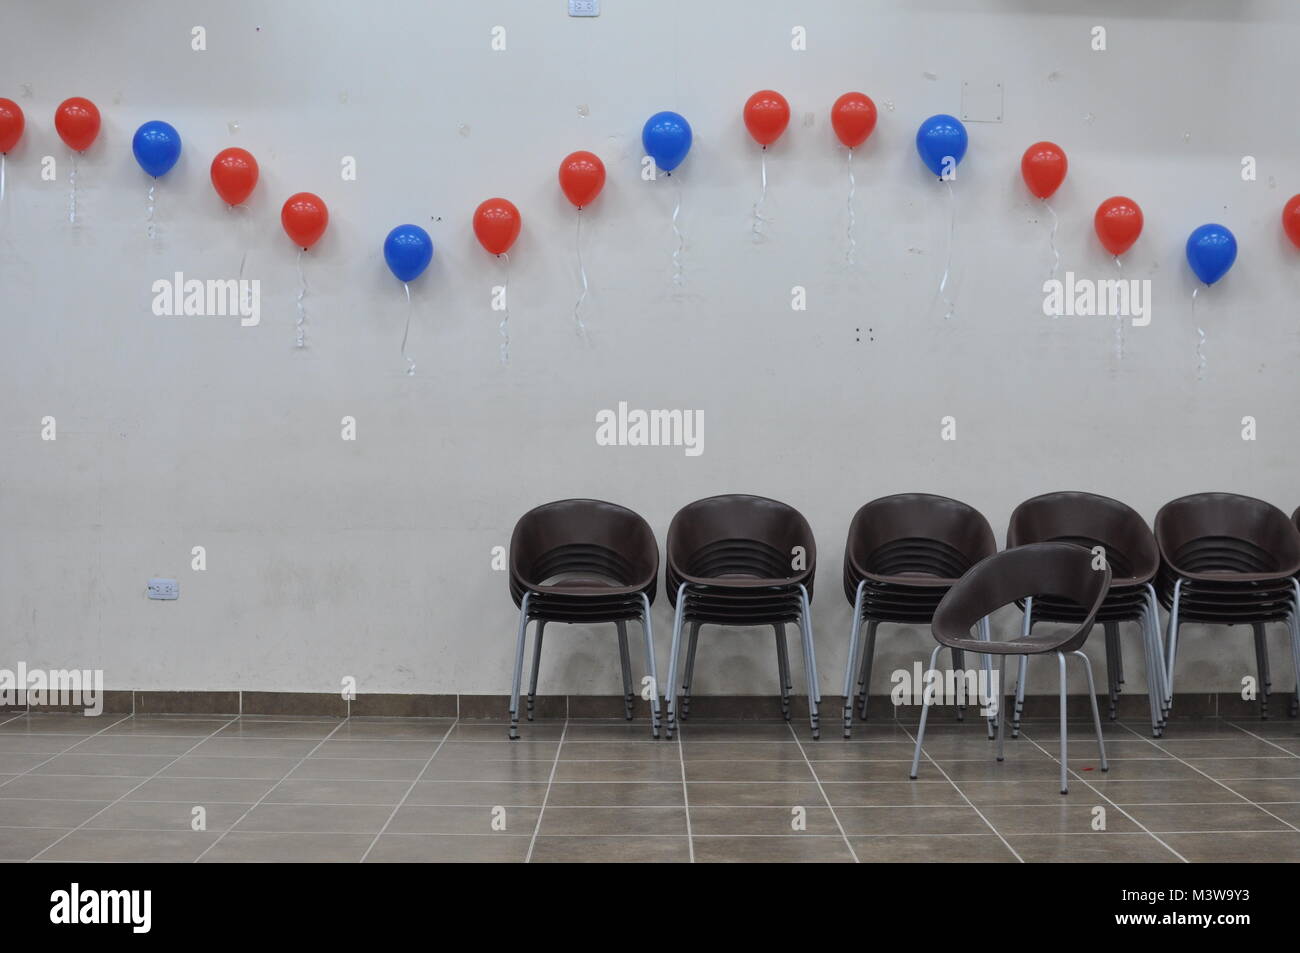 Stacks of chairs and balloons on the wall after a party celebration Stock Photo